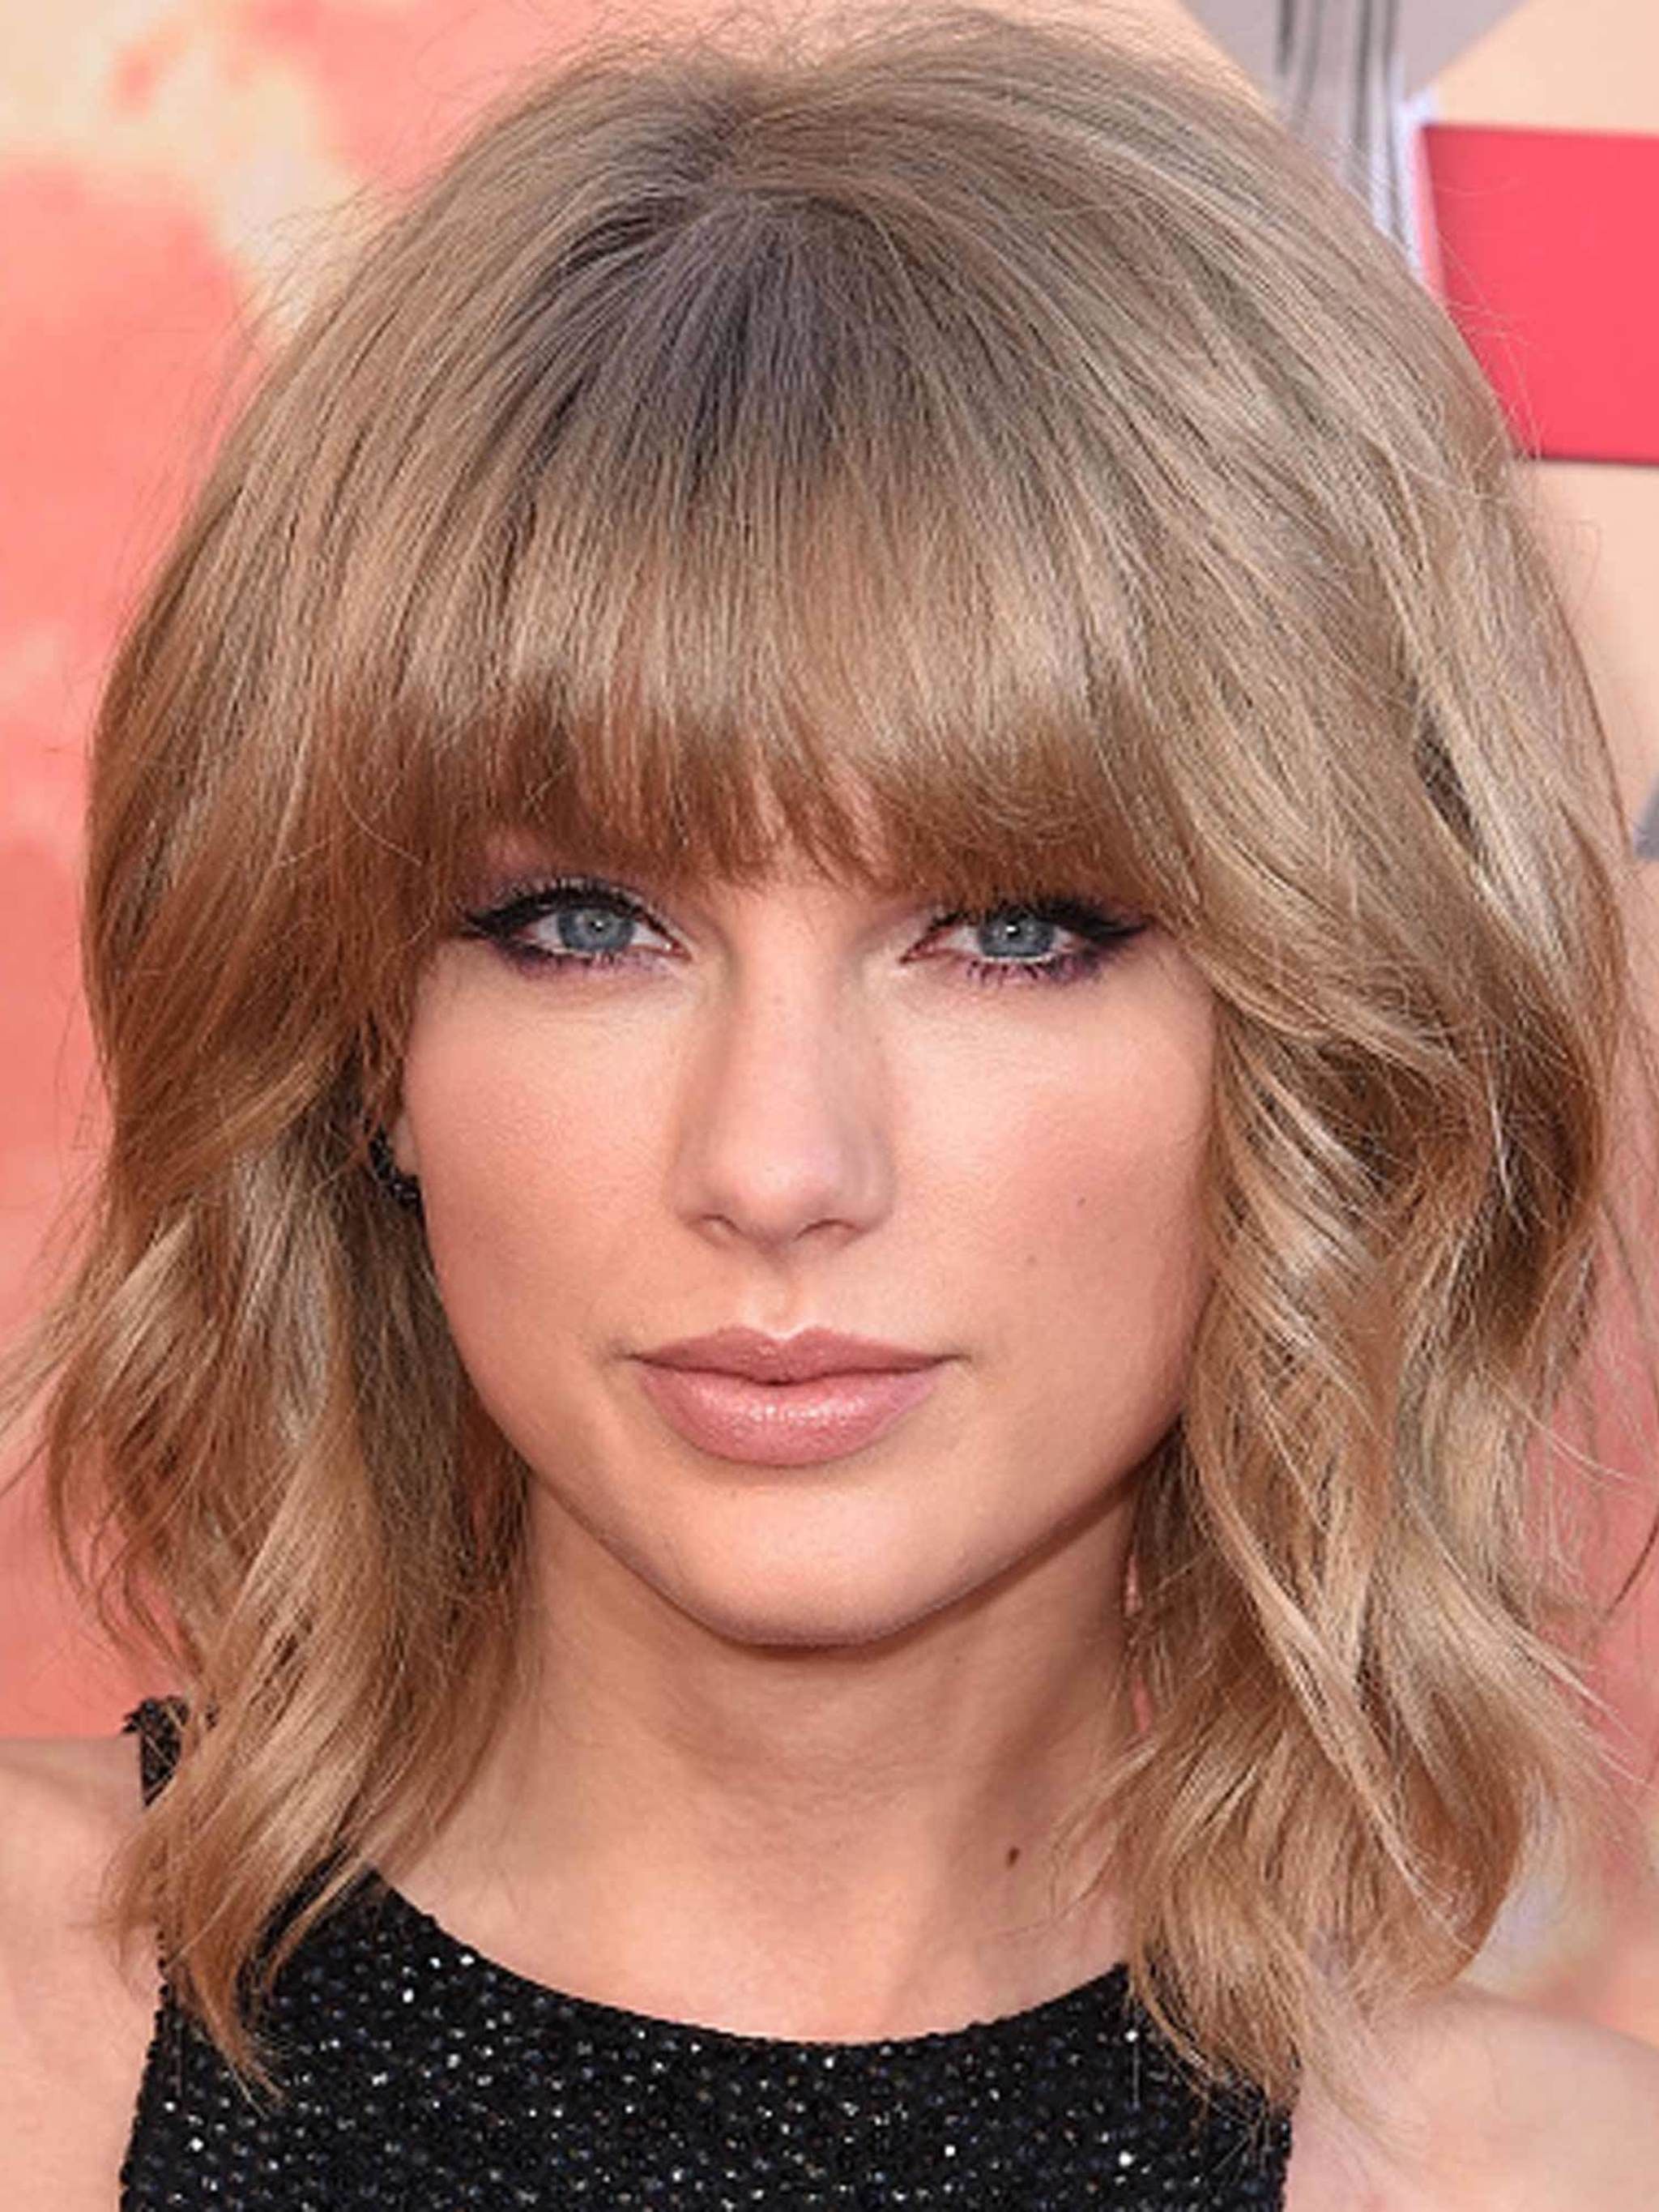 Taylor Swift's Hair Journey: From Wavy Lob To Classic Bob